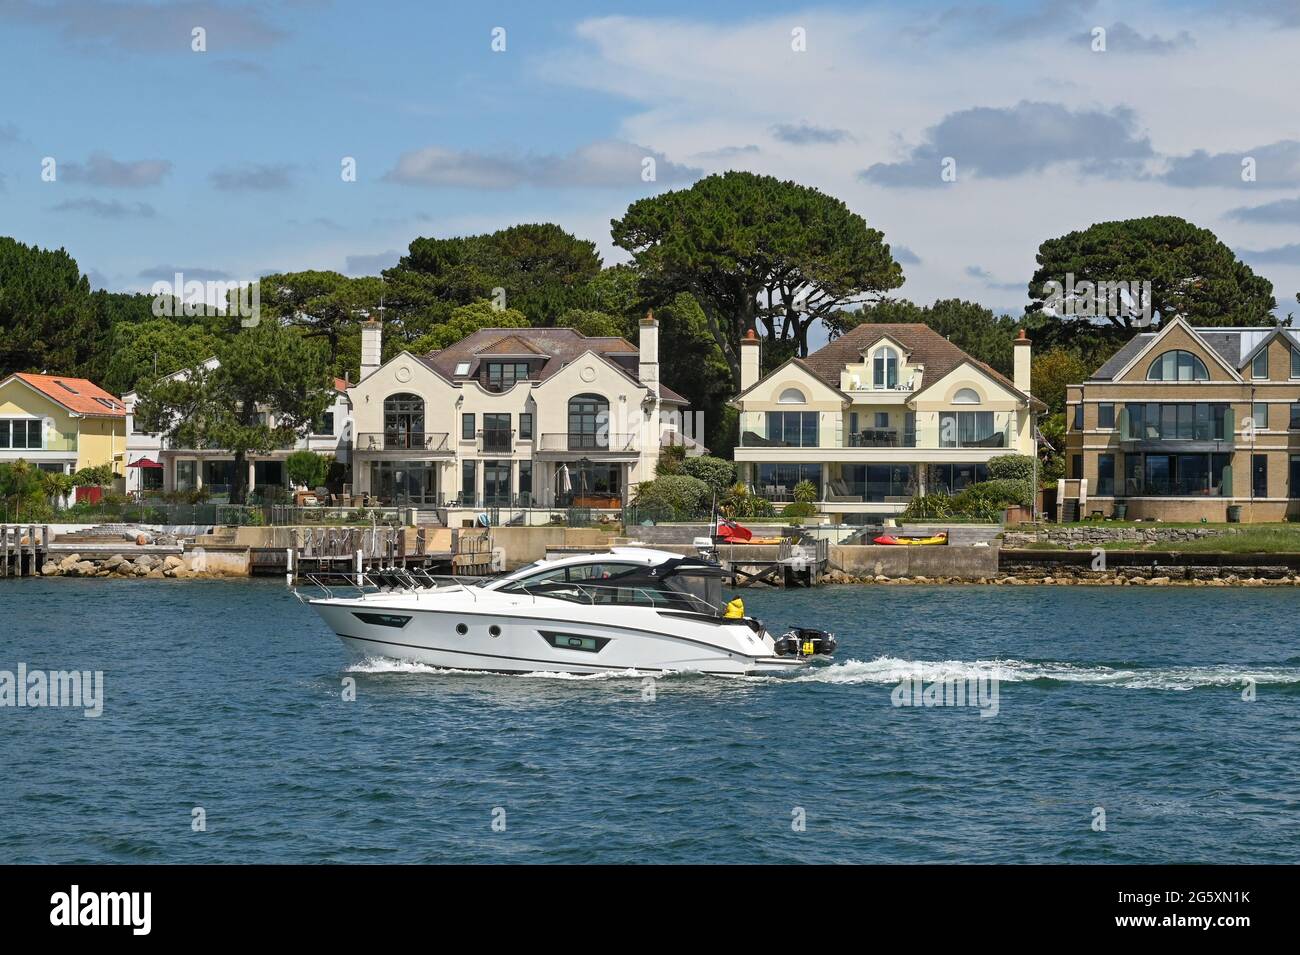 Poole, England - June 2021: Motorboat sailing past houses on the waterfront in the Sandbanks areas of Poole Stock Photo